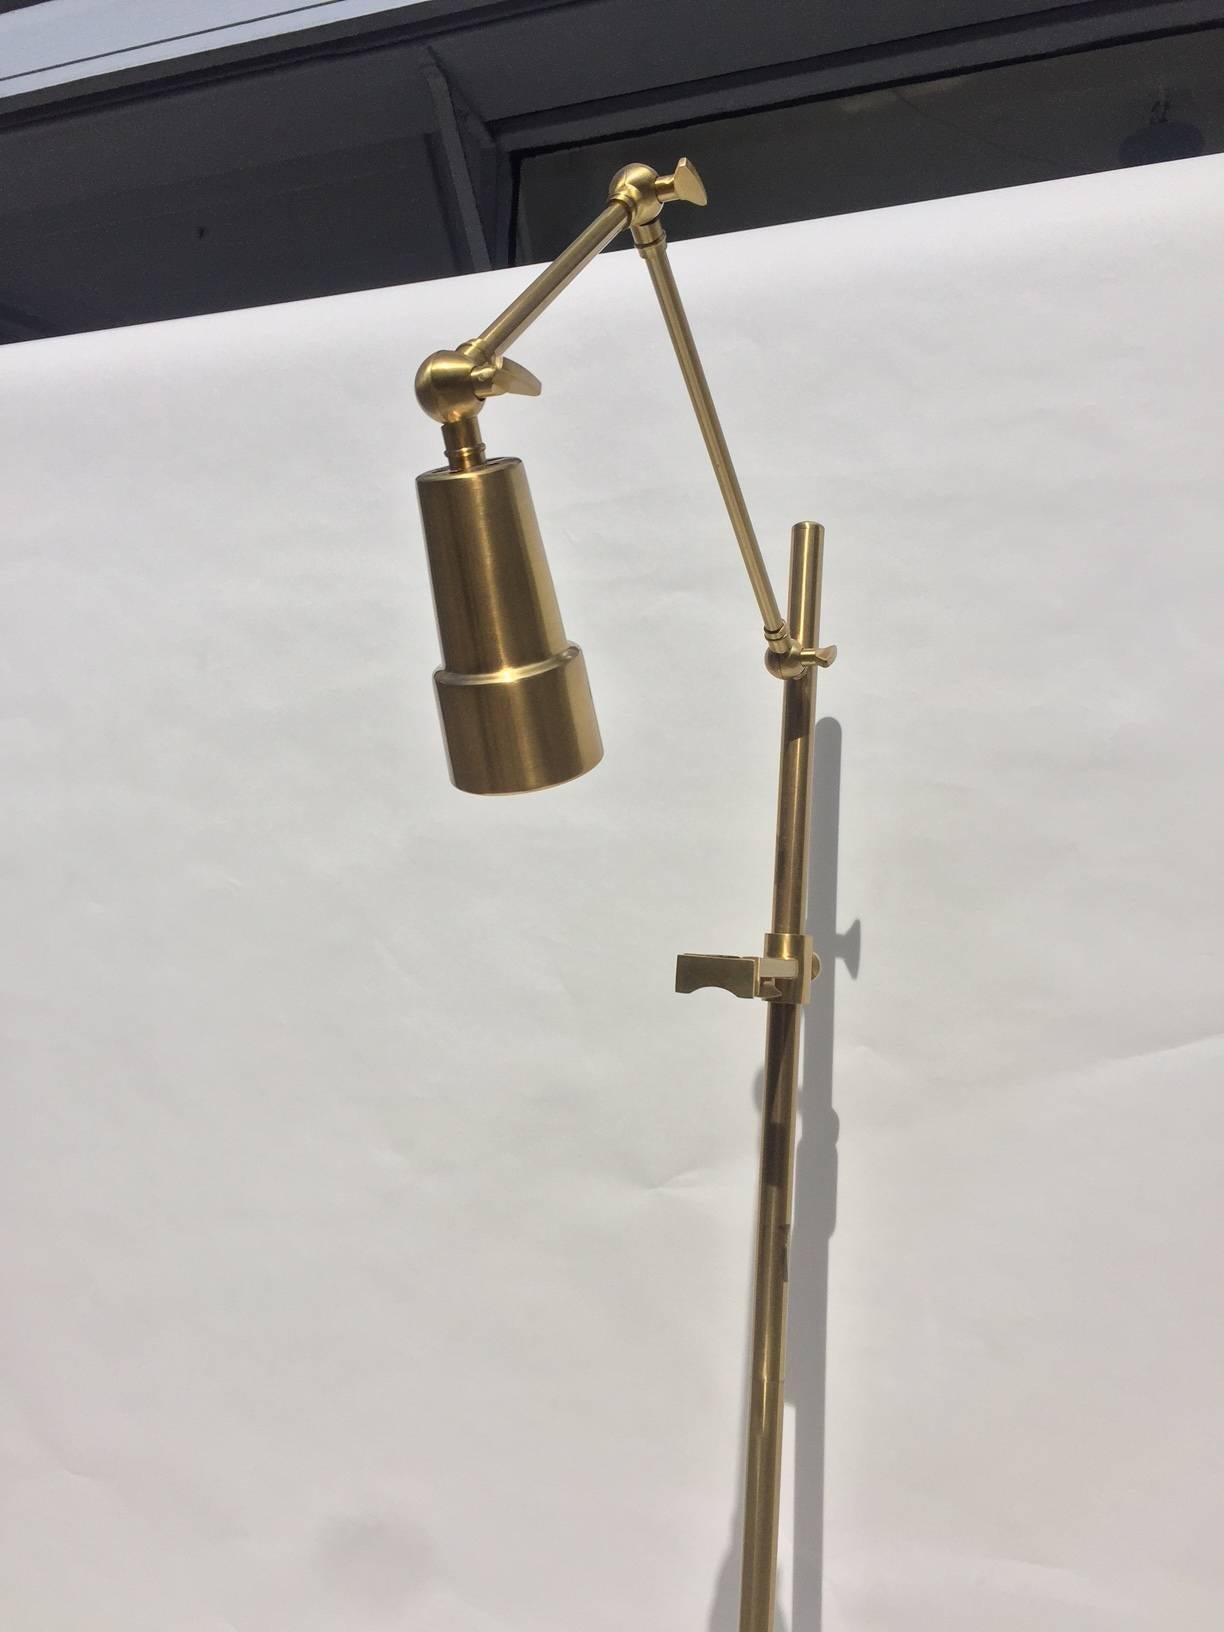 A 1970s Italian easel lamp in polished brass. The lamp has multiple adjustments to direct the light to any size artwork. Each support arm for the artwork are also adjustable in height and depth to secure your favorite artwork.